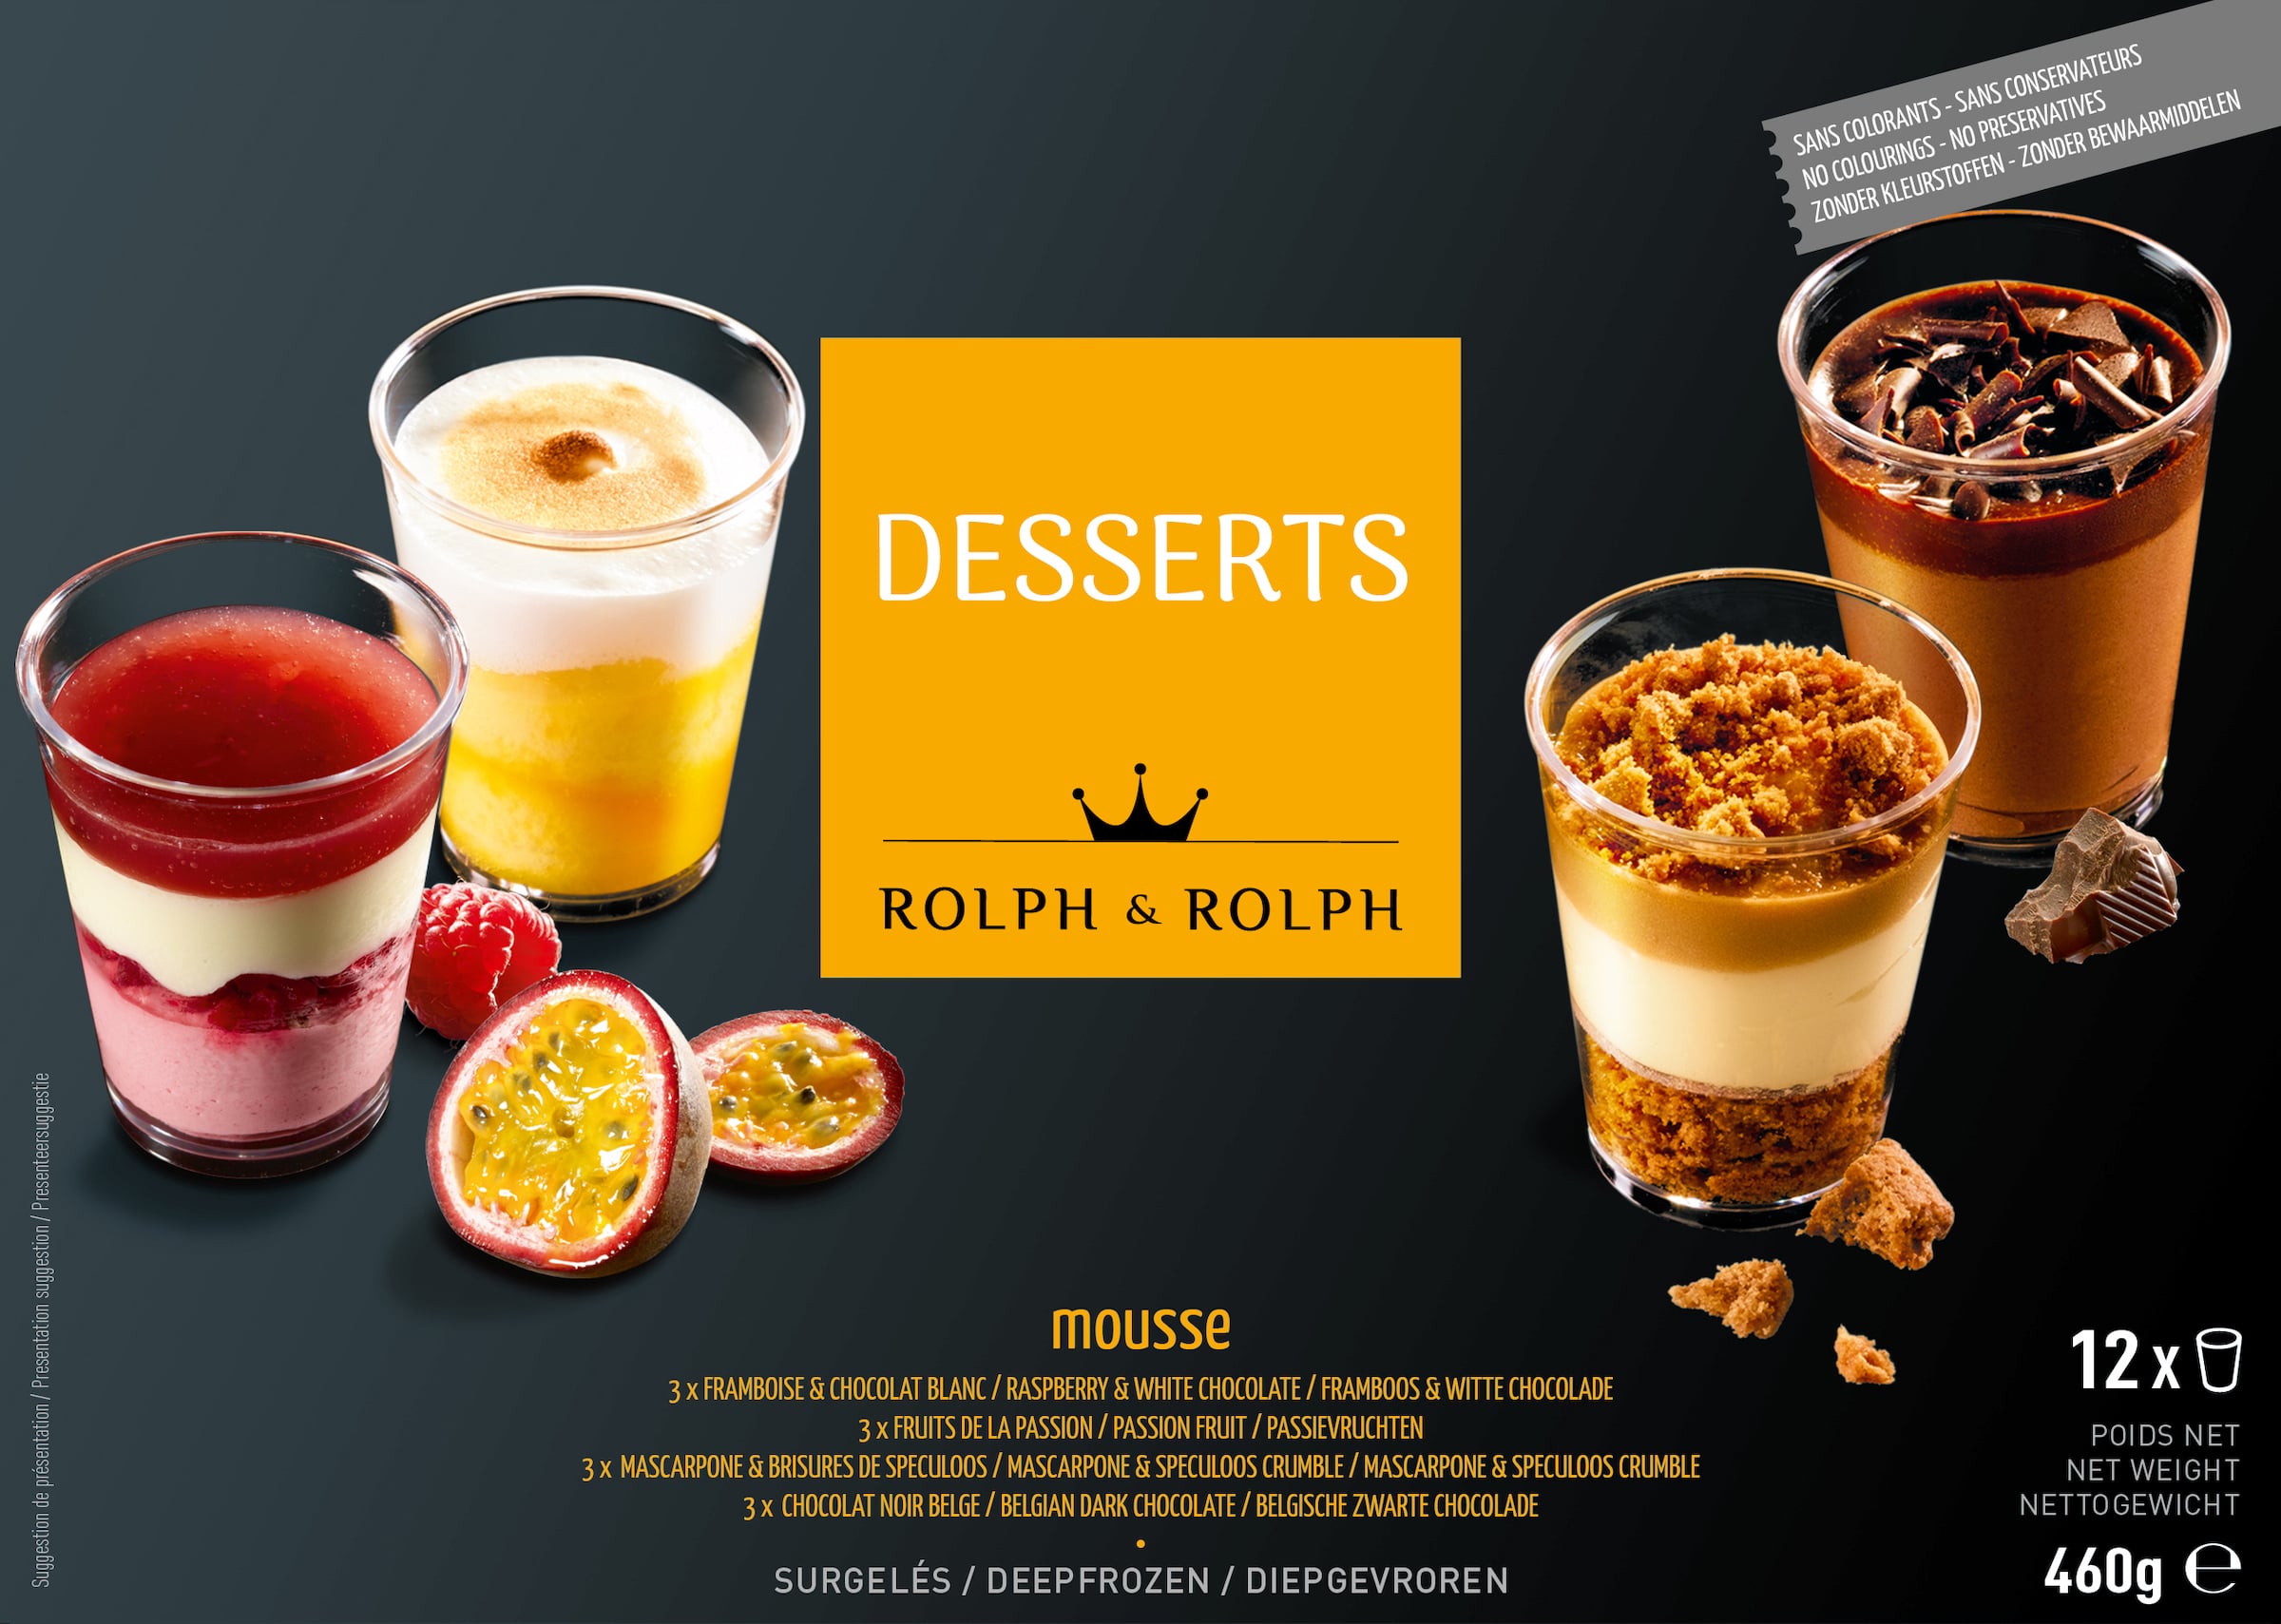 Mini Desserts by Food n Joy - Coffee, Vanilla and Chocolate Mousse - 12 pack Frozen - 451g (15.90 oz)